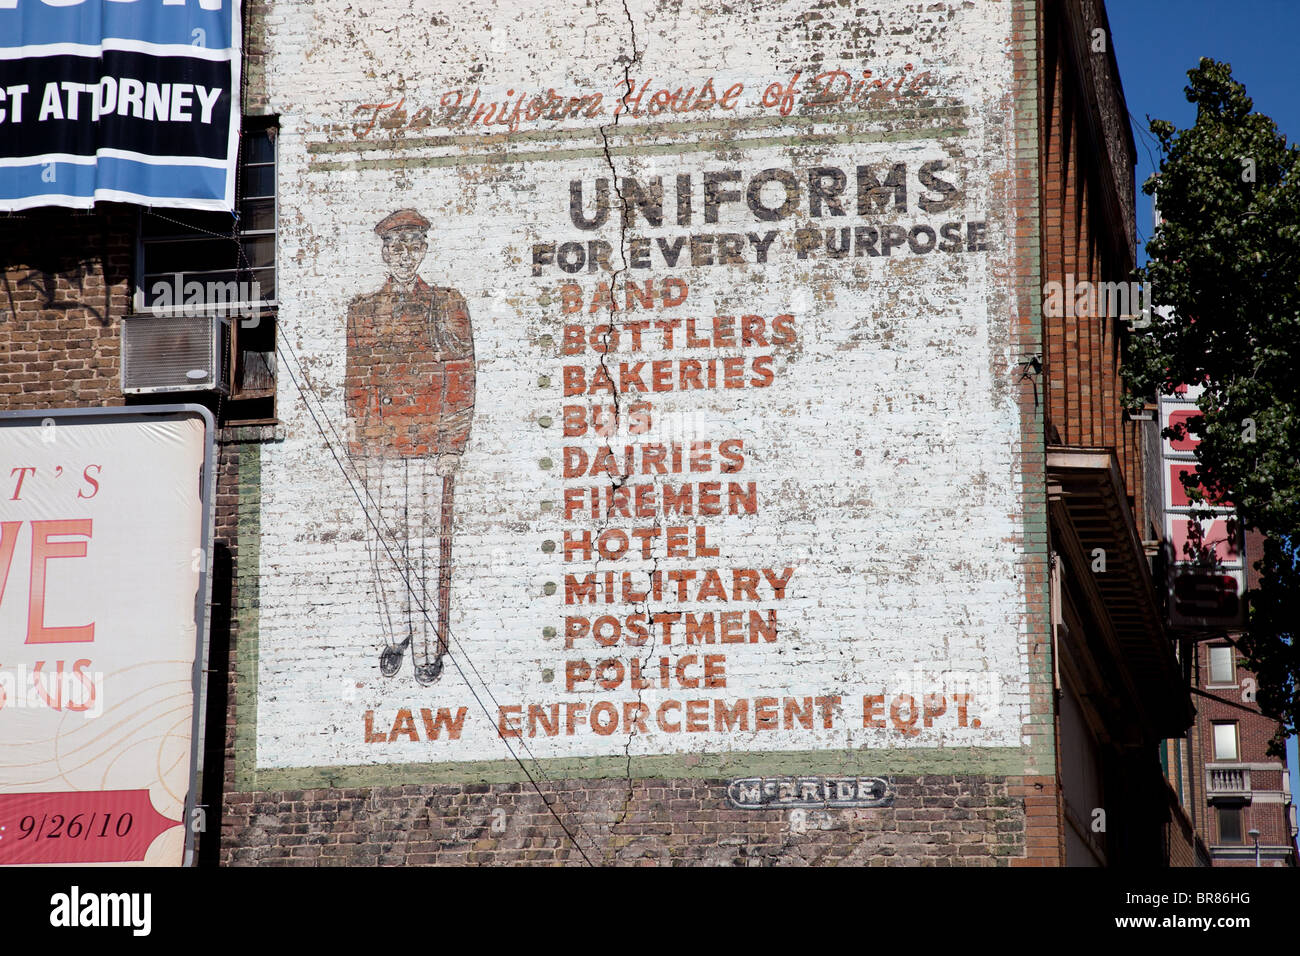 An old advertisement for uniforms graces the wall of an old building in Birmingham, Alabama Stock Photo